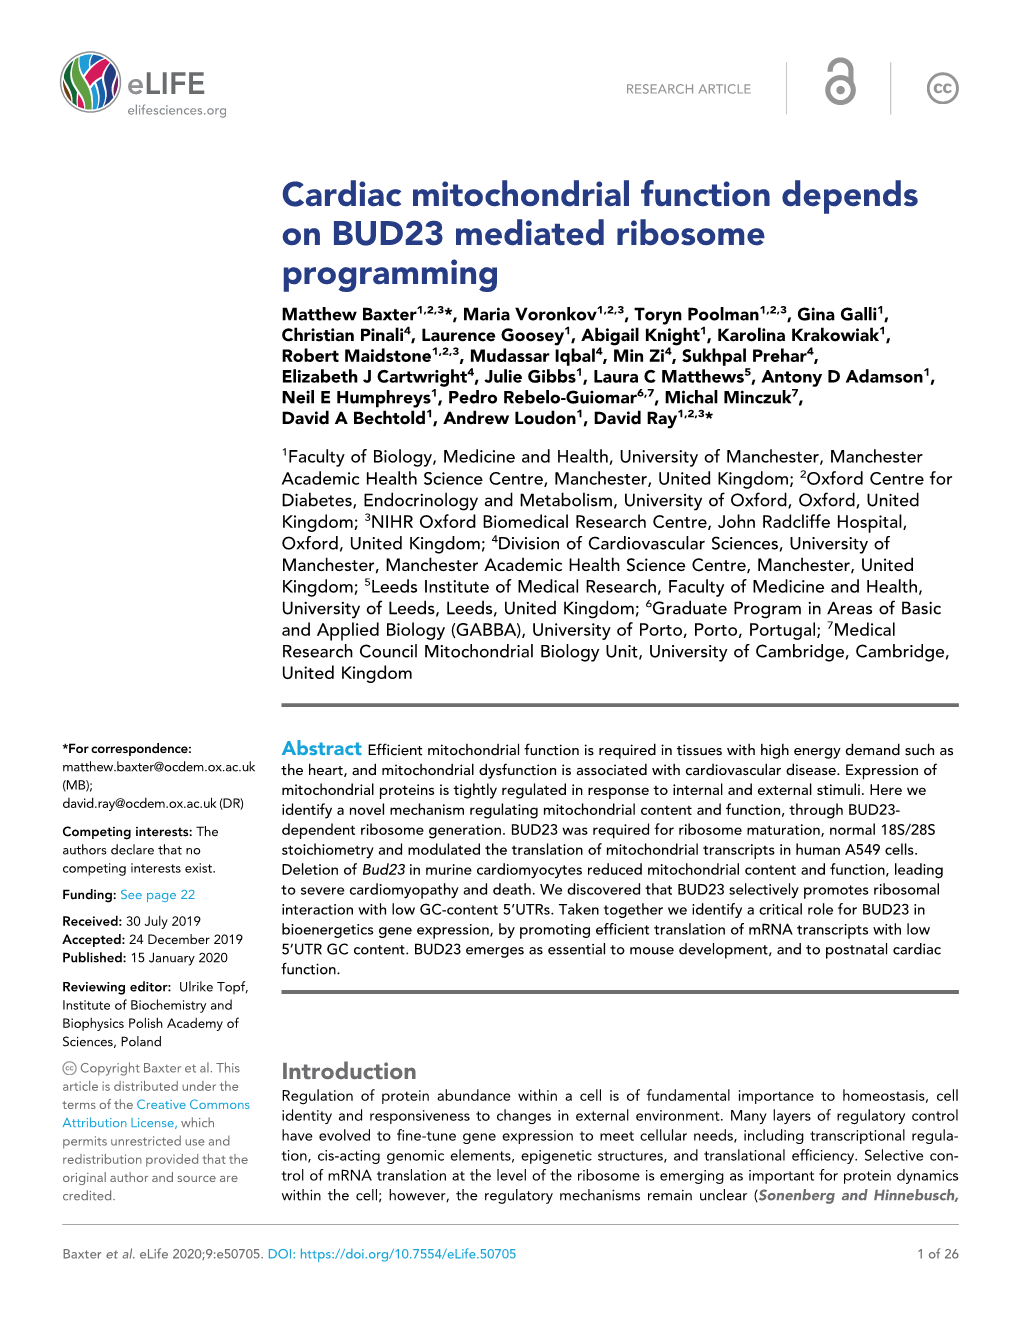 Cardiac Mitochondrial Function Depends on BUD23 Mediated